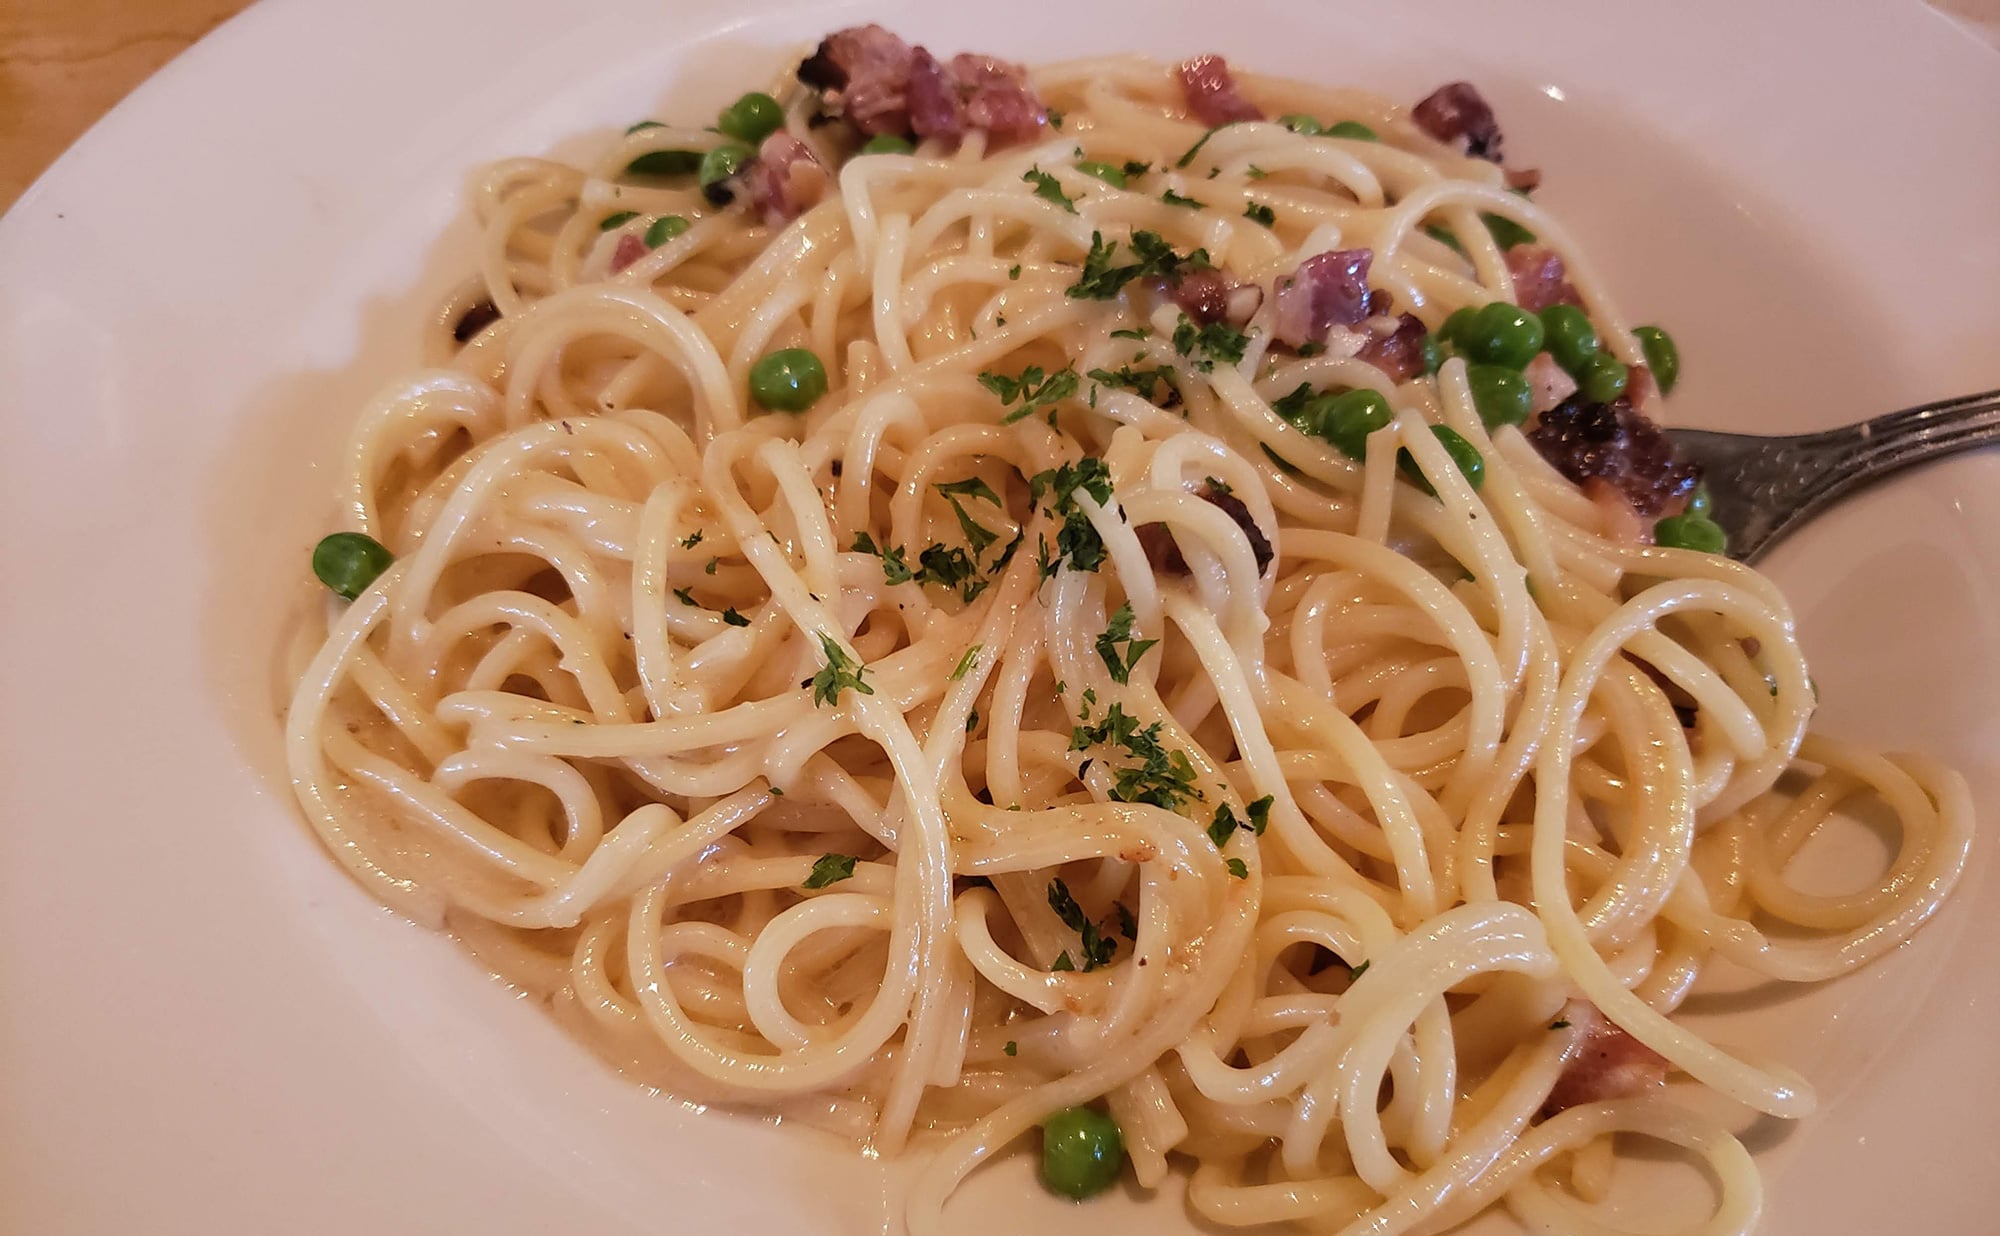 A plate of pasta with peas and bacon.